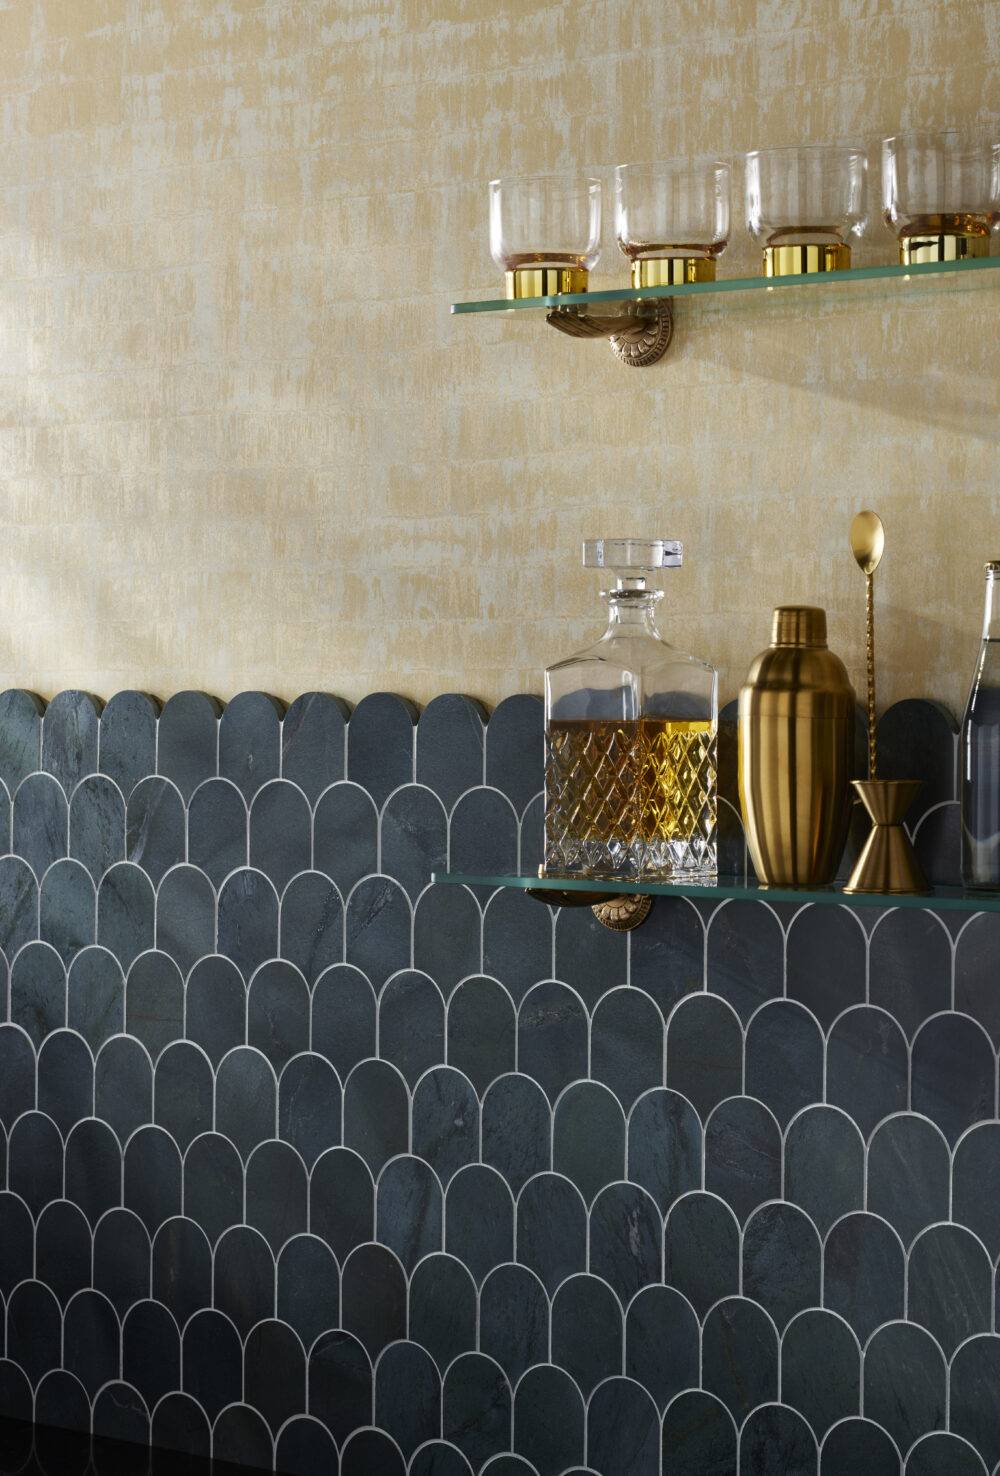 Scalloped tile half wall with glass shelves with glasses and bar items. 